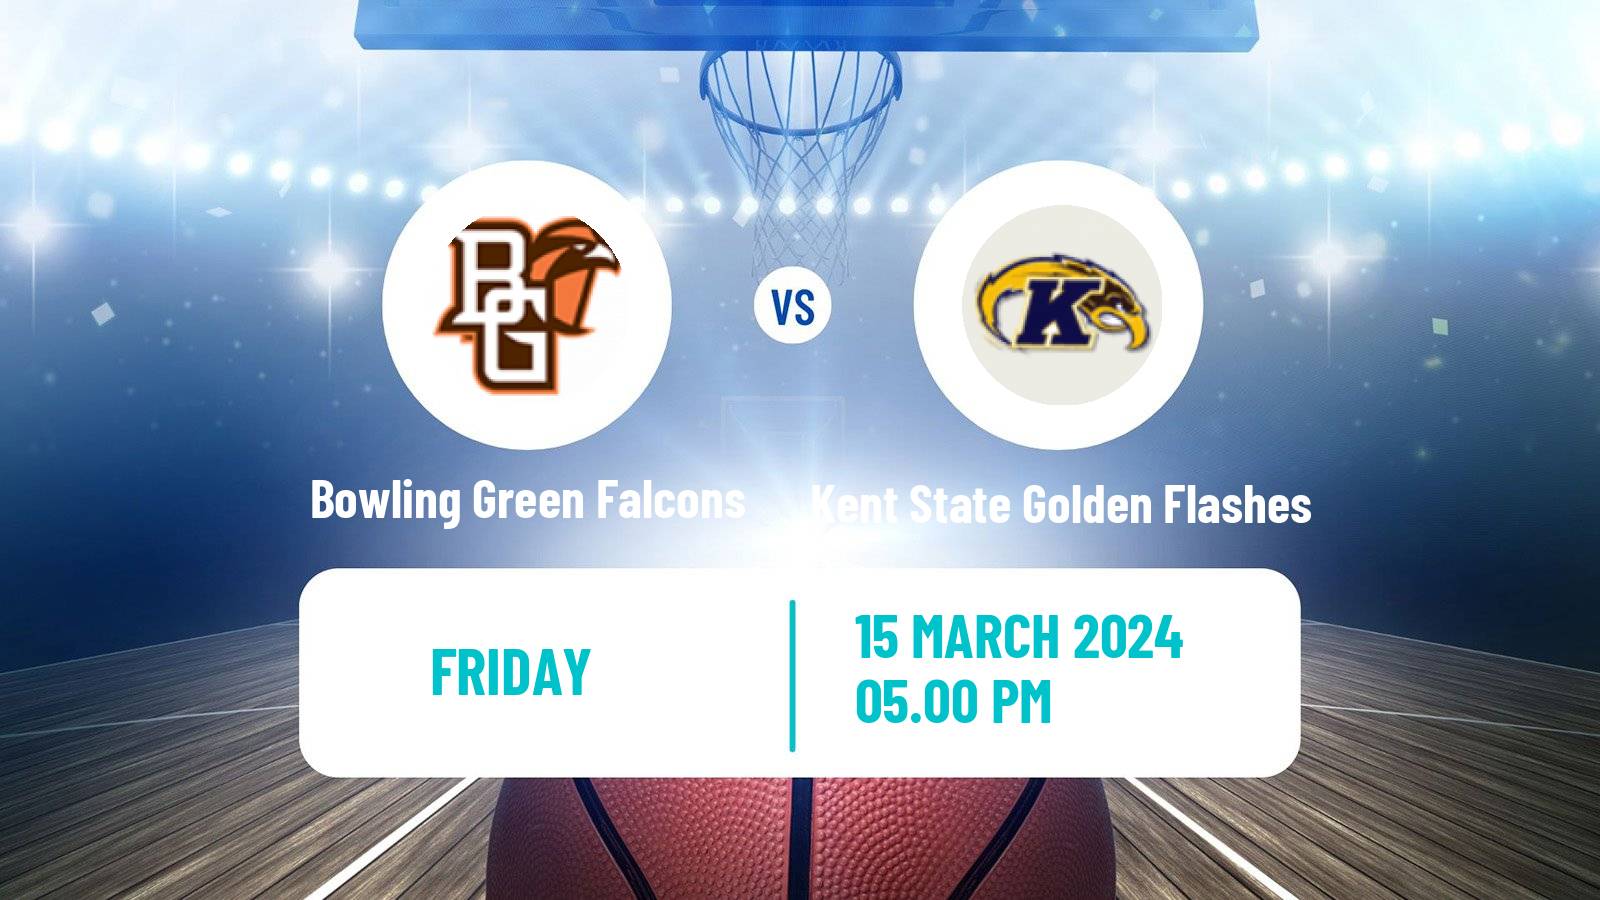 Basketball NCAA College Basketball Bowling Green Falcons - Kent State Golden Flashes